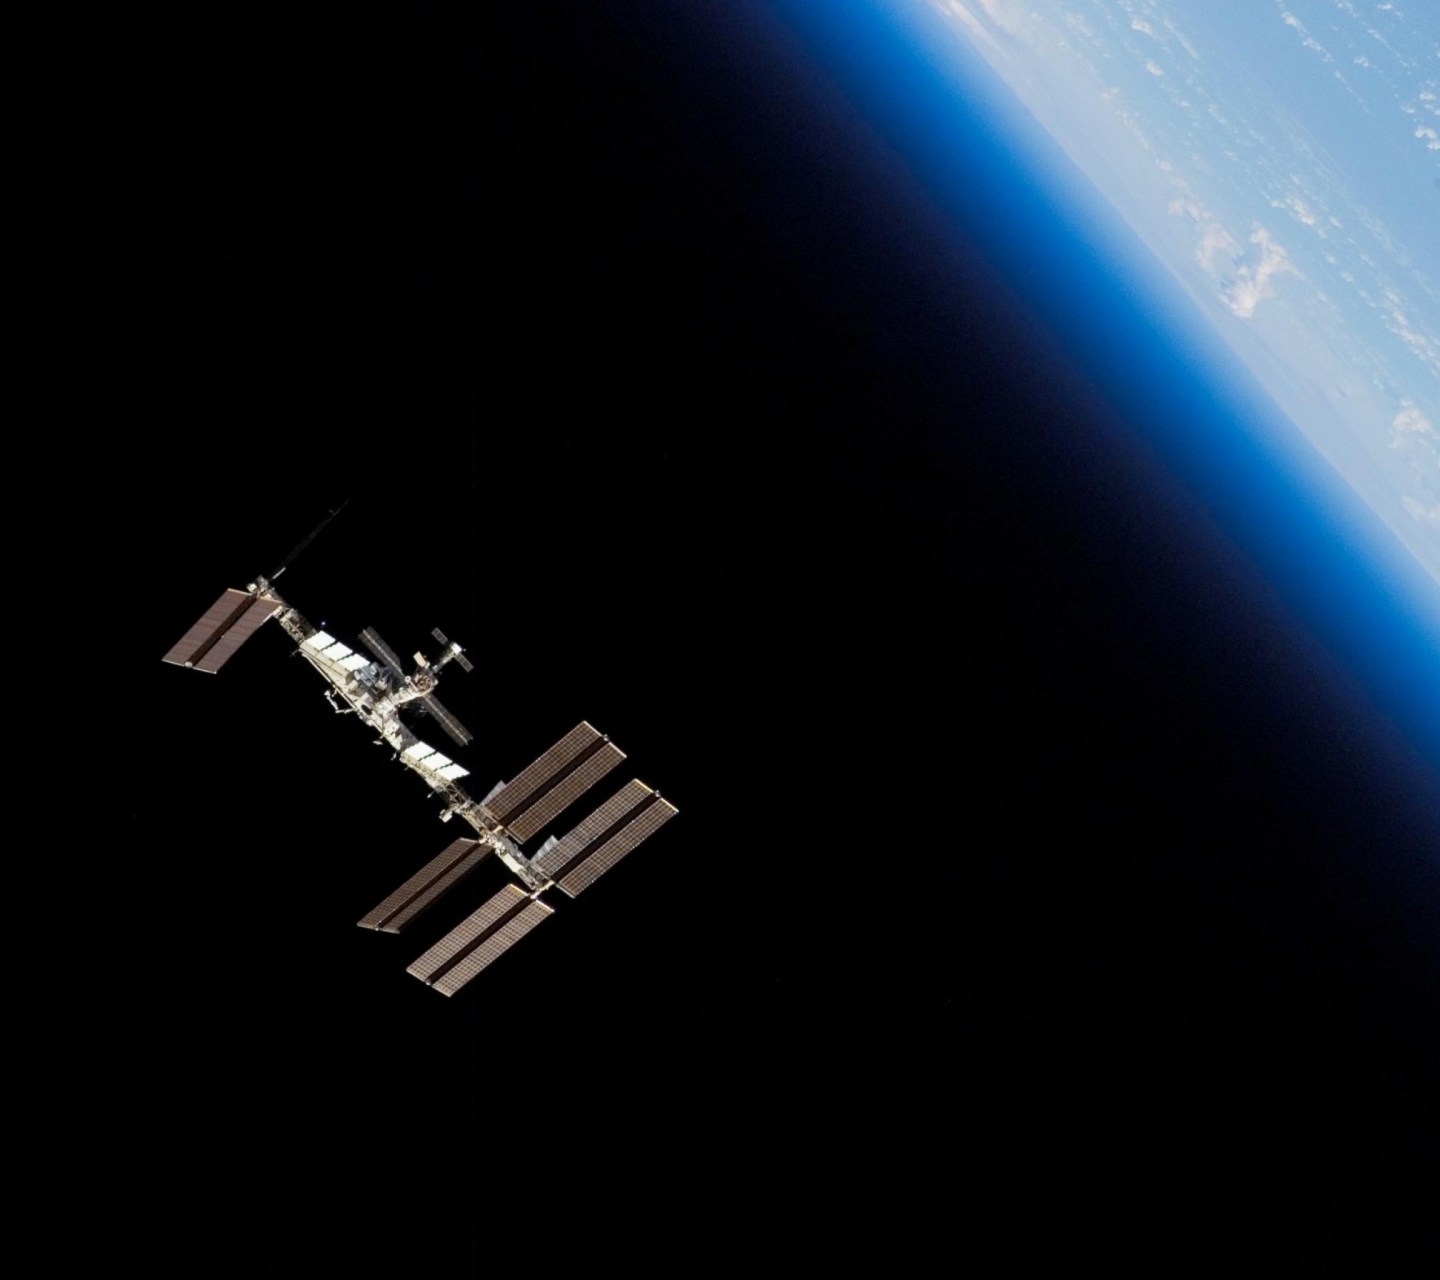 The ISS In Space screenshot #1 1440x1280